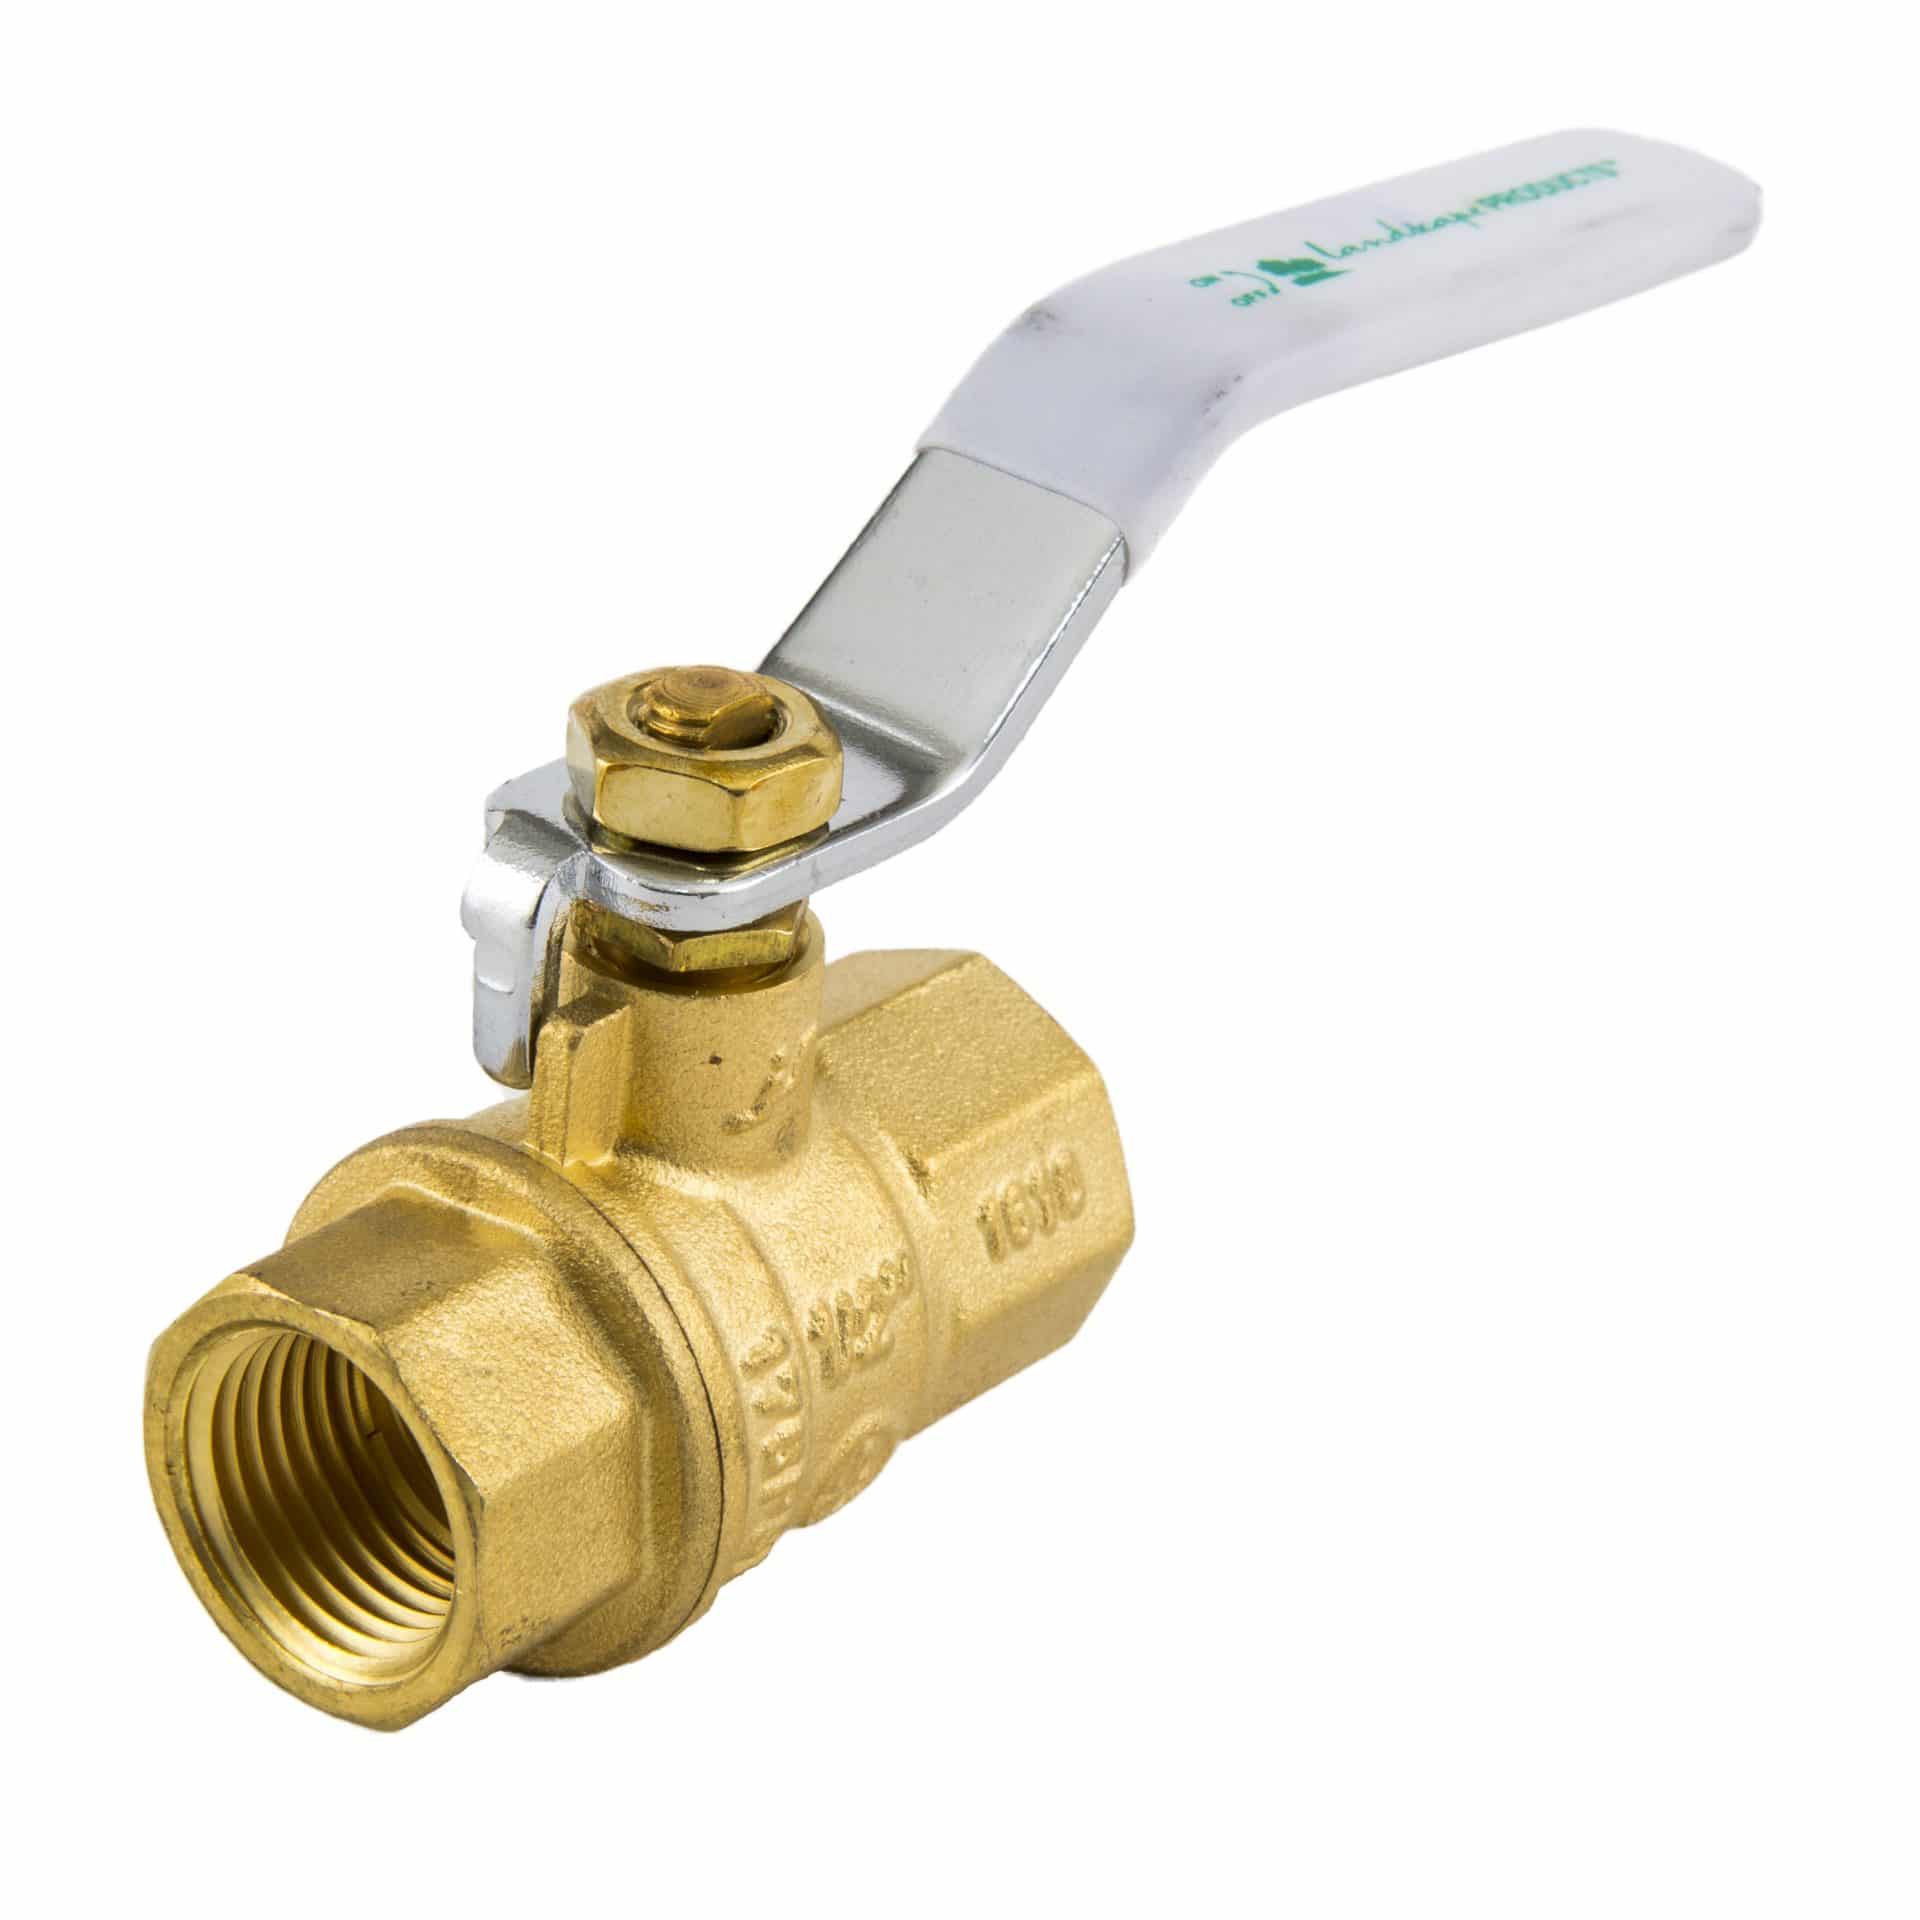 1/2-inch Full Port Brass Ball Valve - Landscape Products Inc.